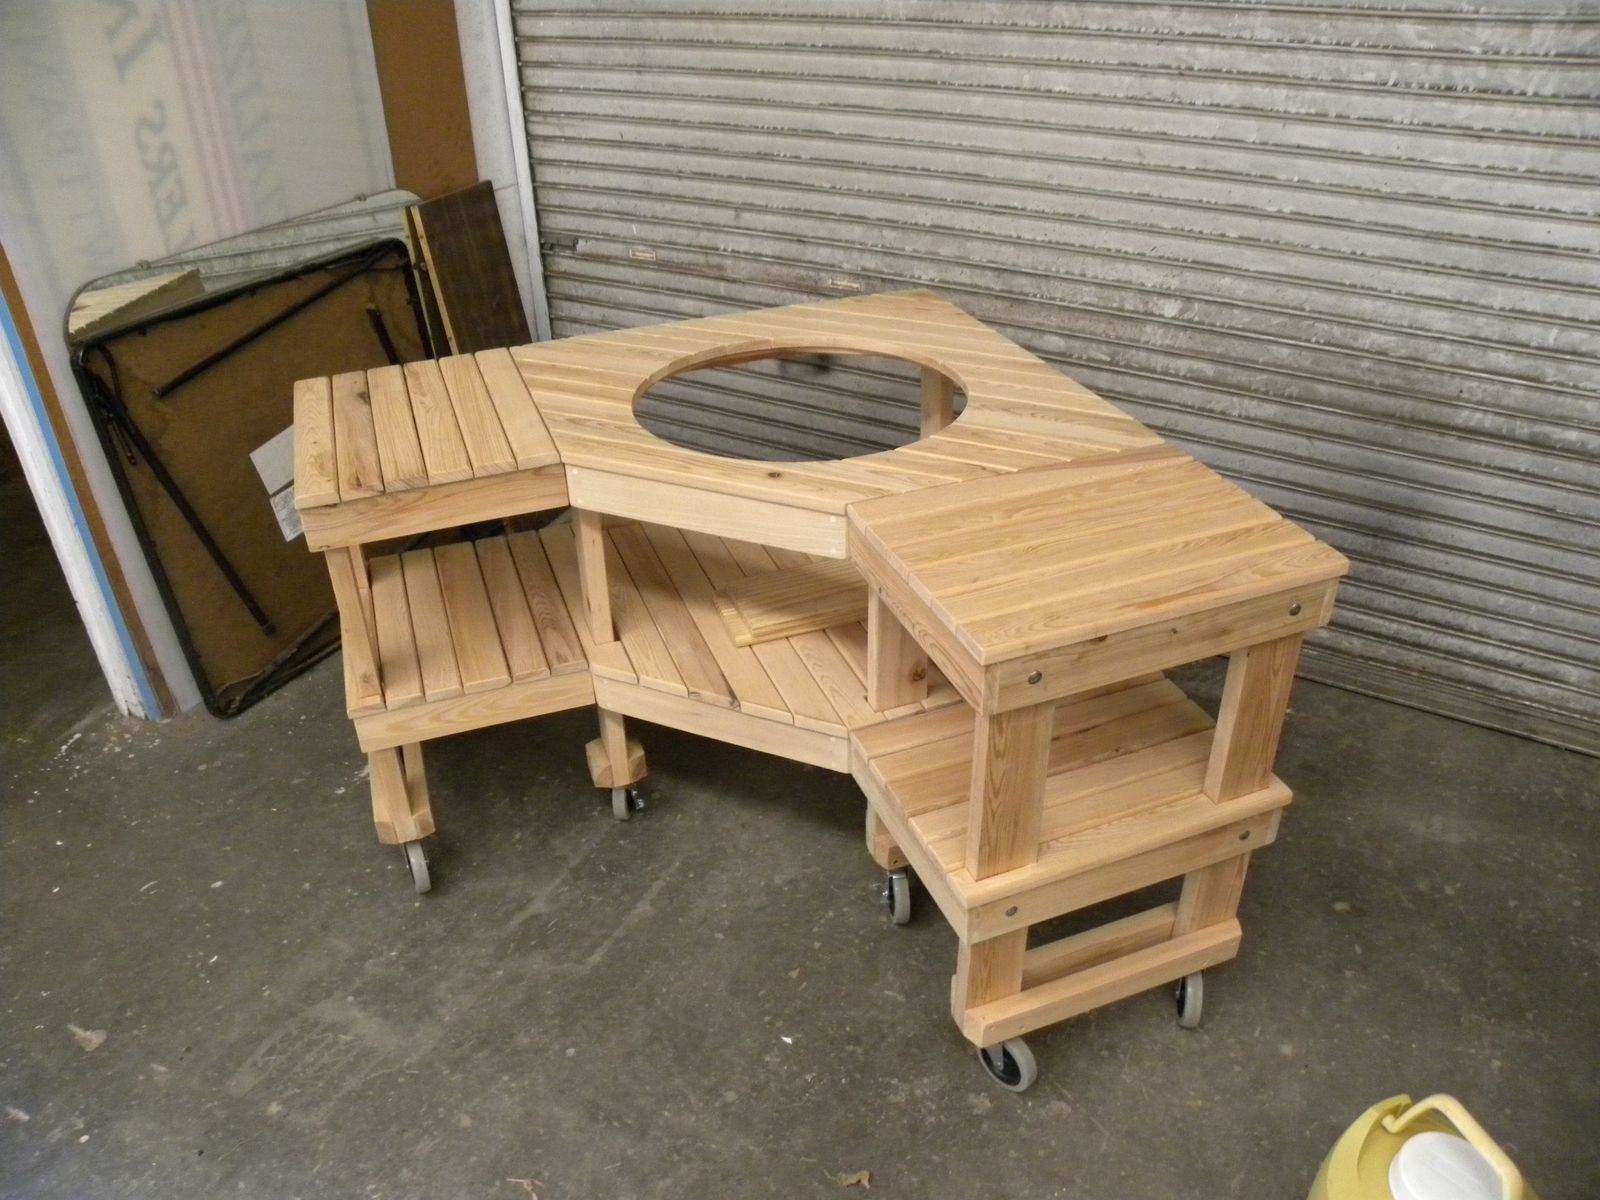 Hand Crafted Green Egg Corner Grill Table by Design47 | CustomMade.com